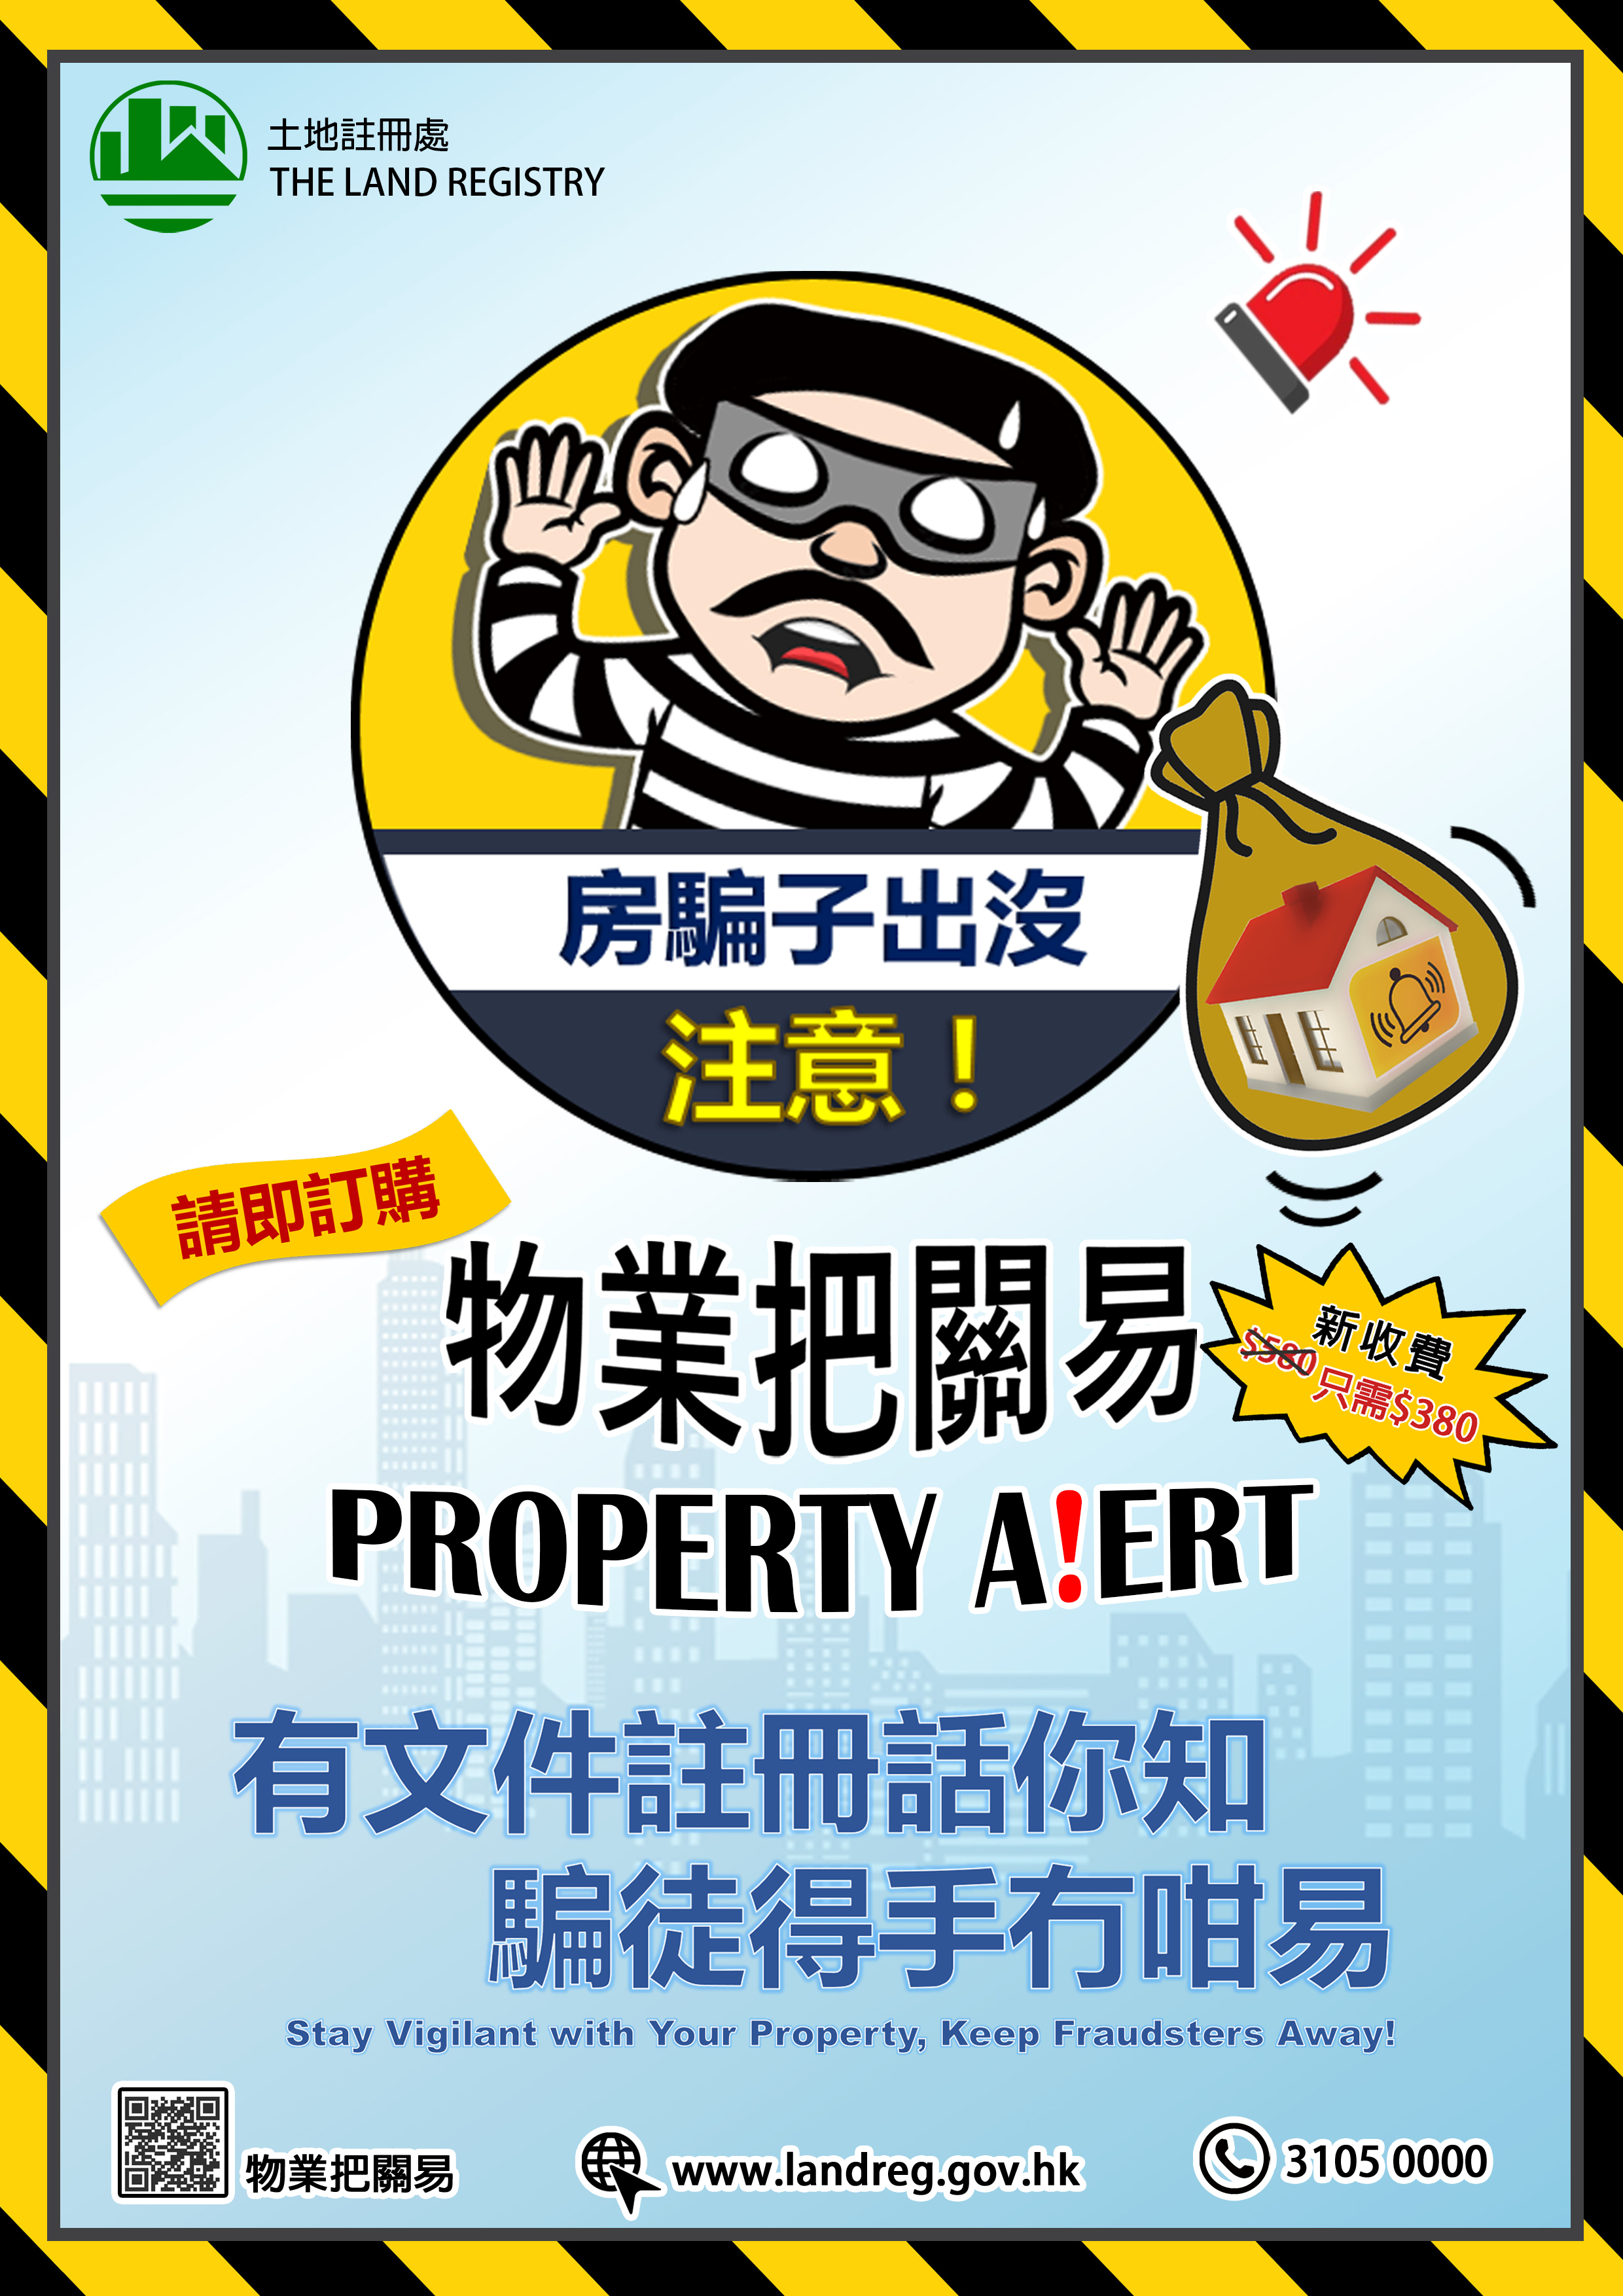 Property Alert for Property Owners